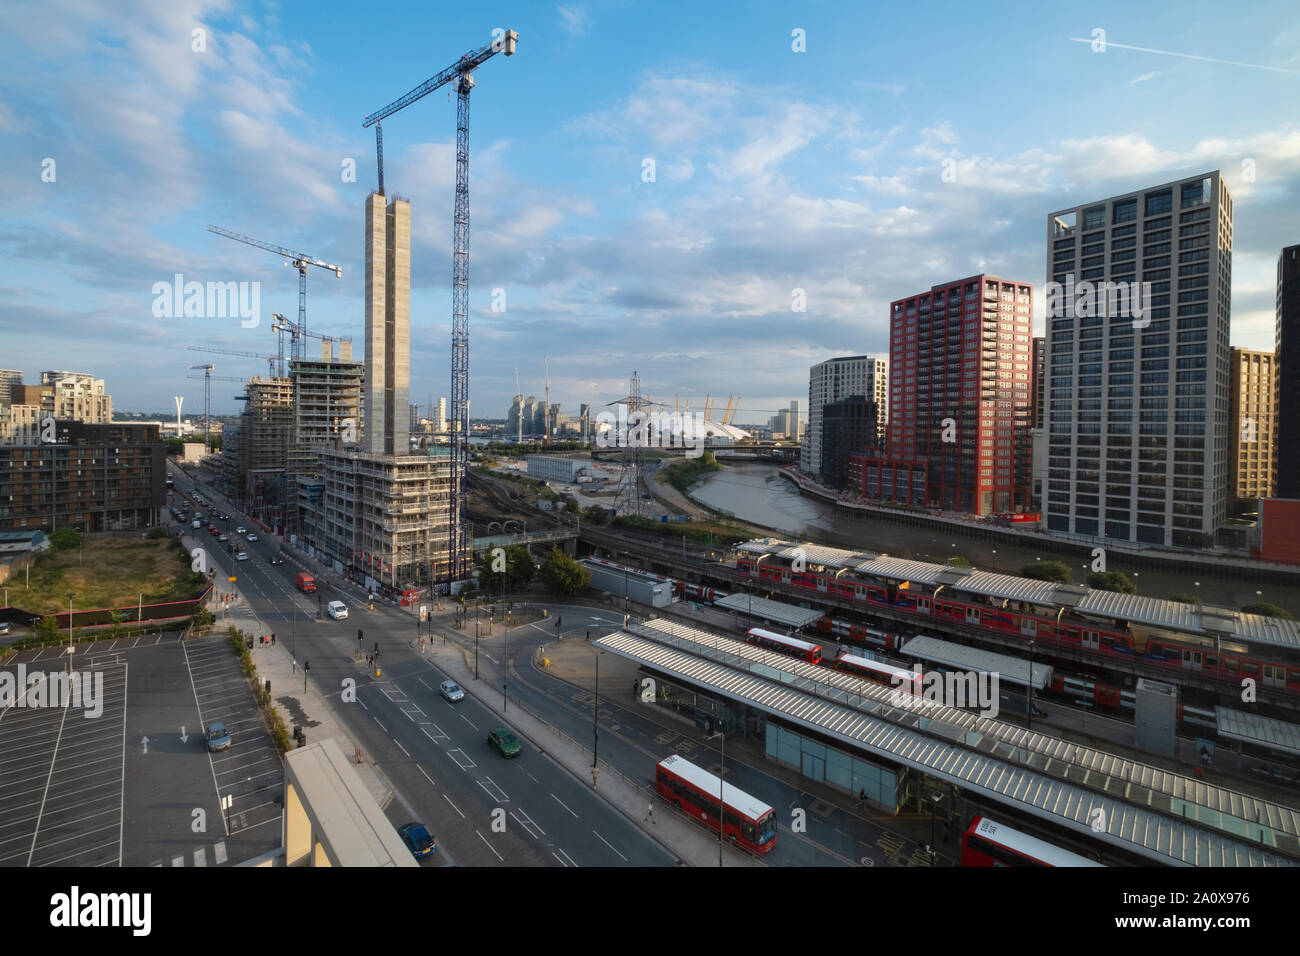 Canning Town, London, United Kingdom 2nd August 2019: Construction work in Canning Town, London Docklands next to underground and docklands light rail Stock Photo